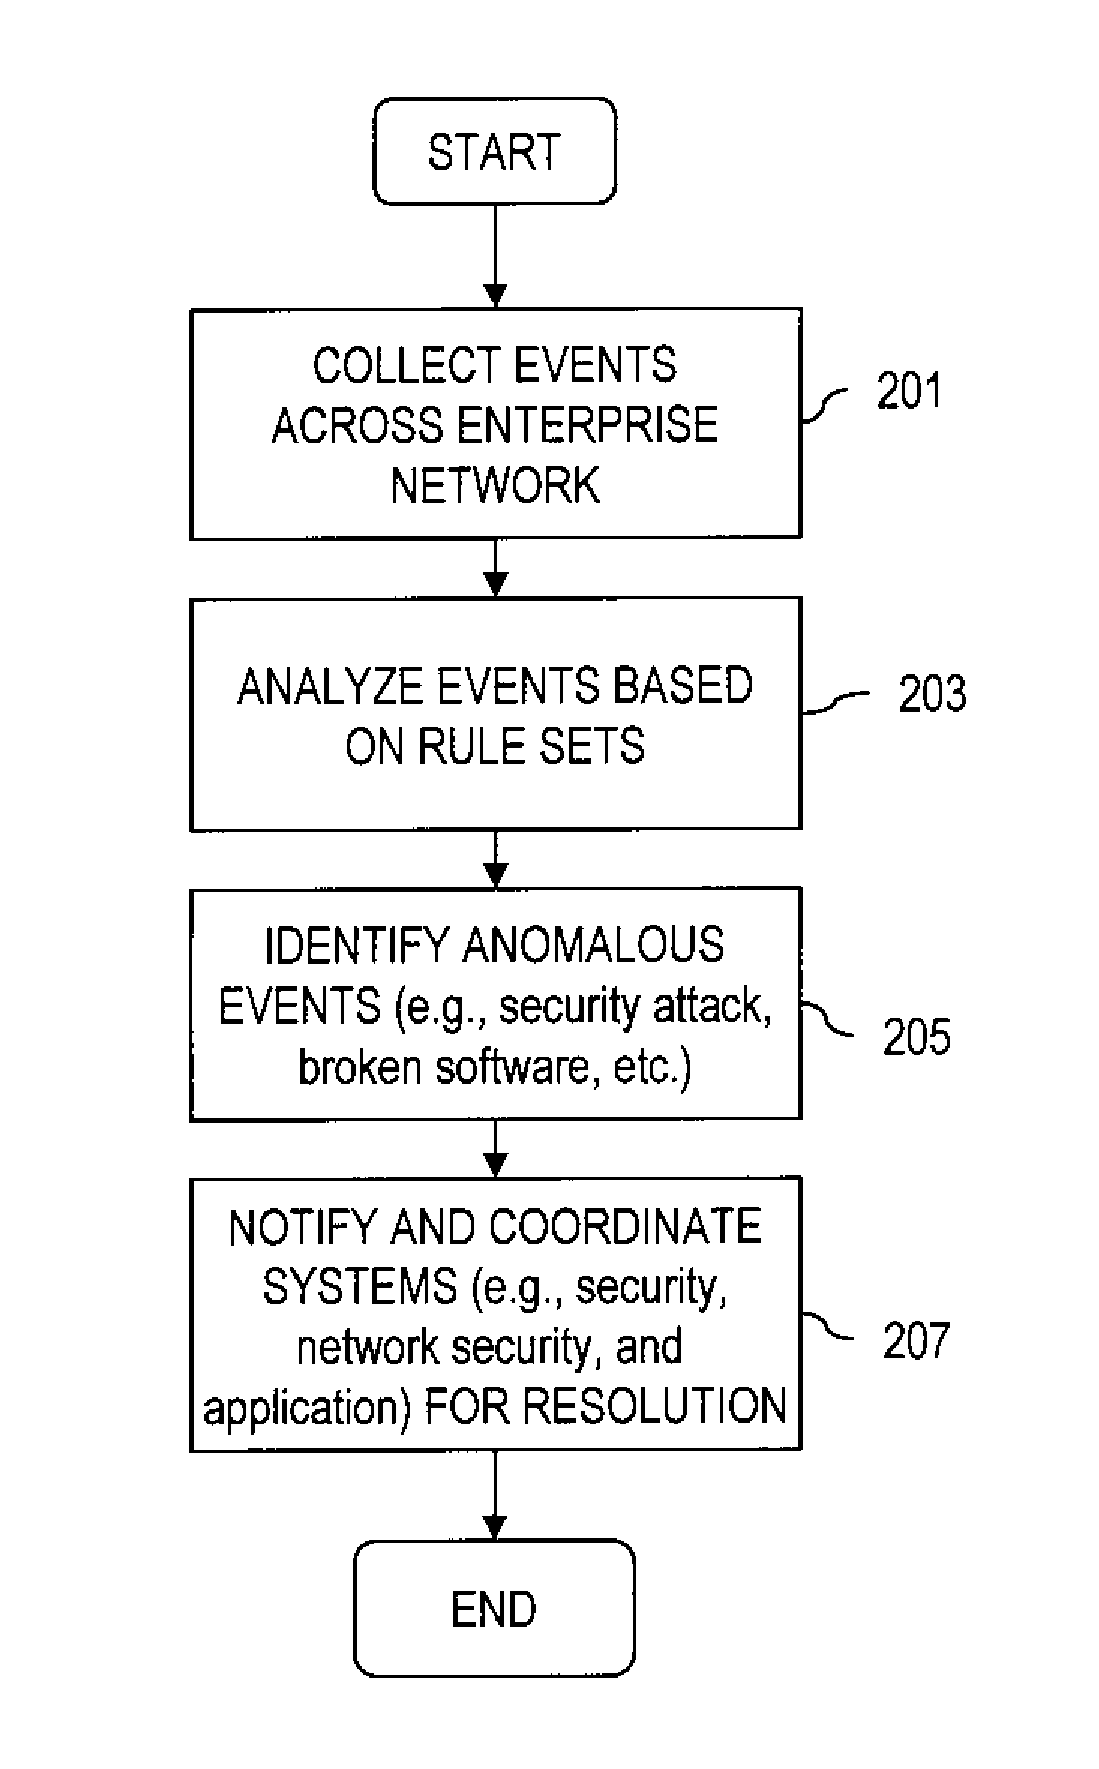 Secure self-organizing and self-provisioning anomalous event detection systems